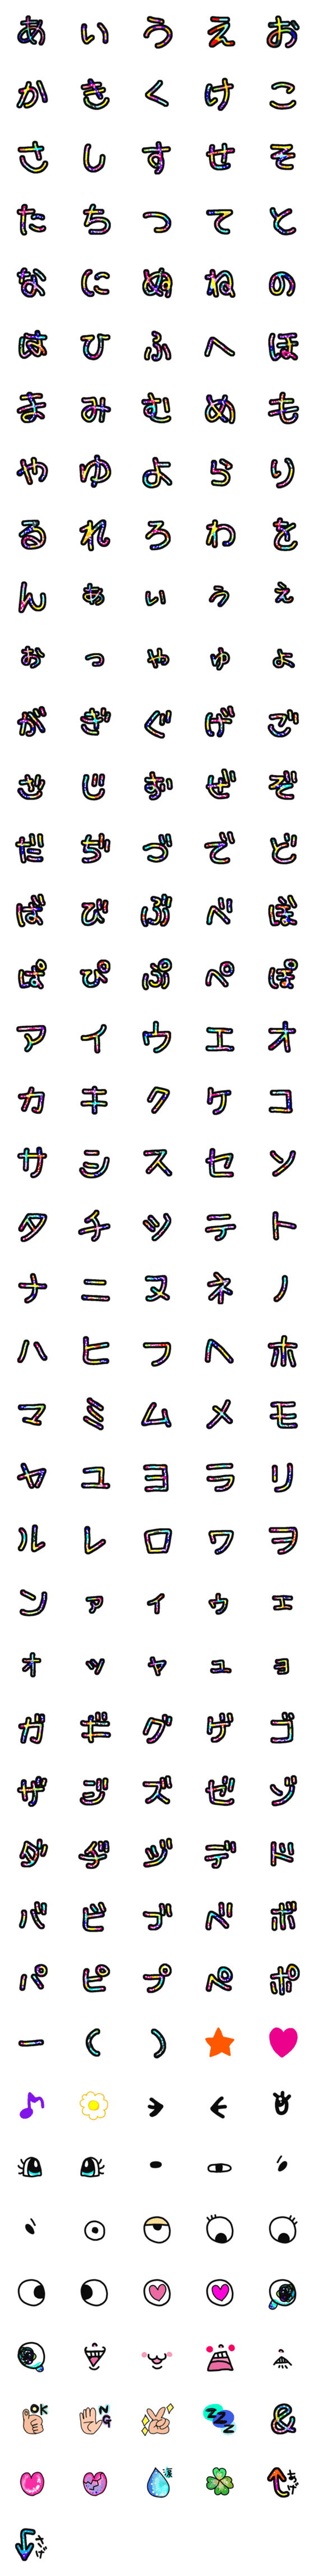 [LINE絵文字]まる絵文字☆顔文字パーツの画像一覧